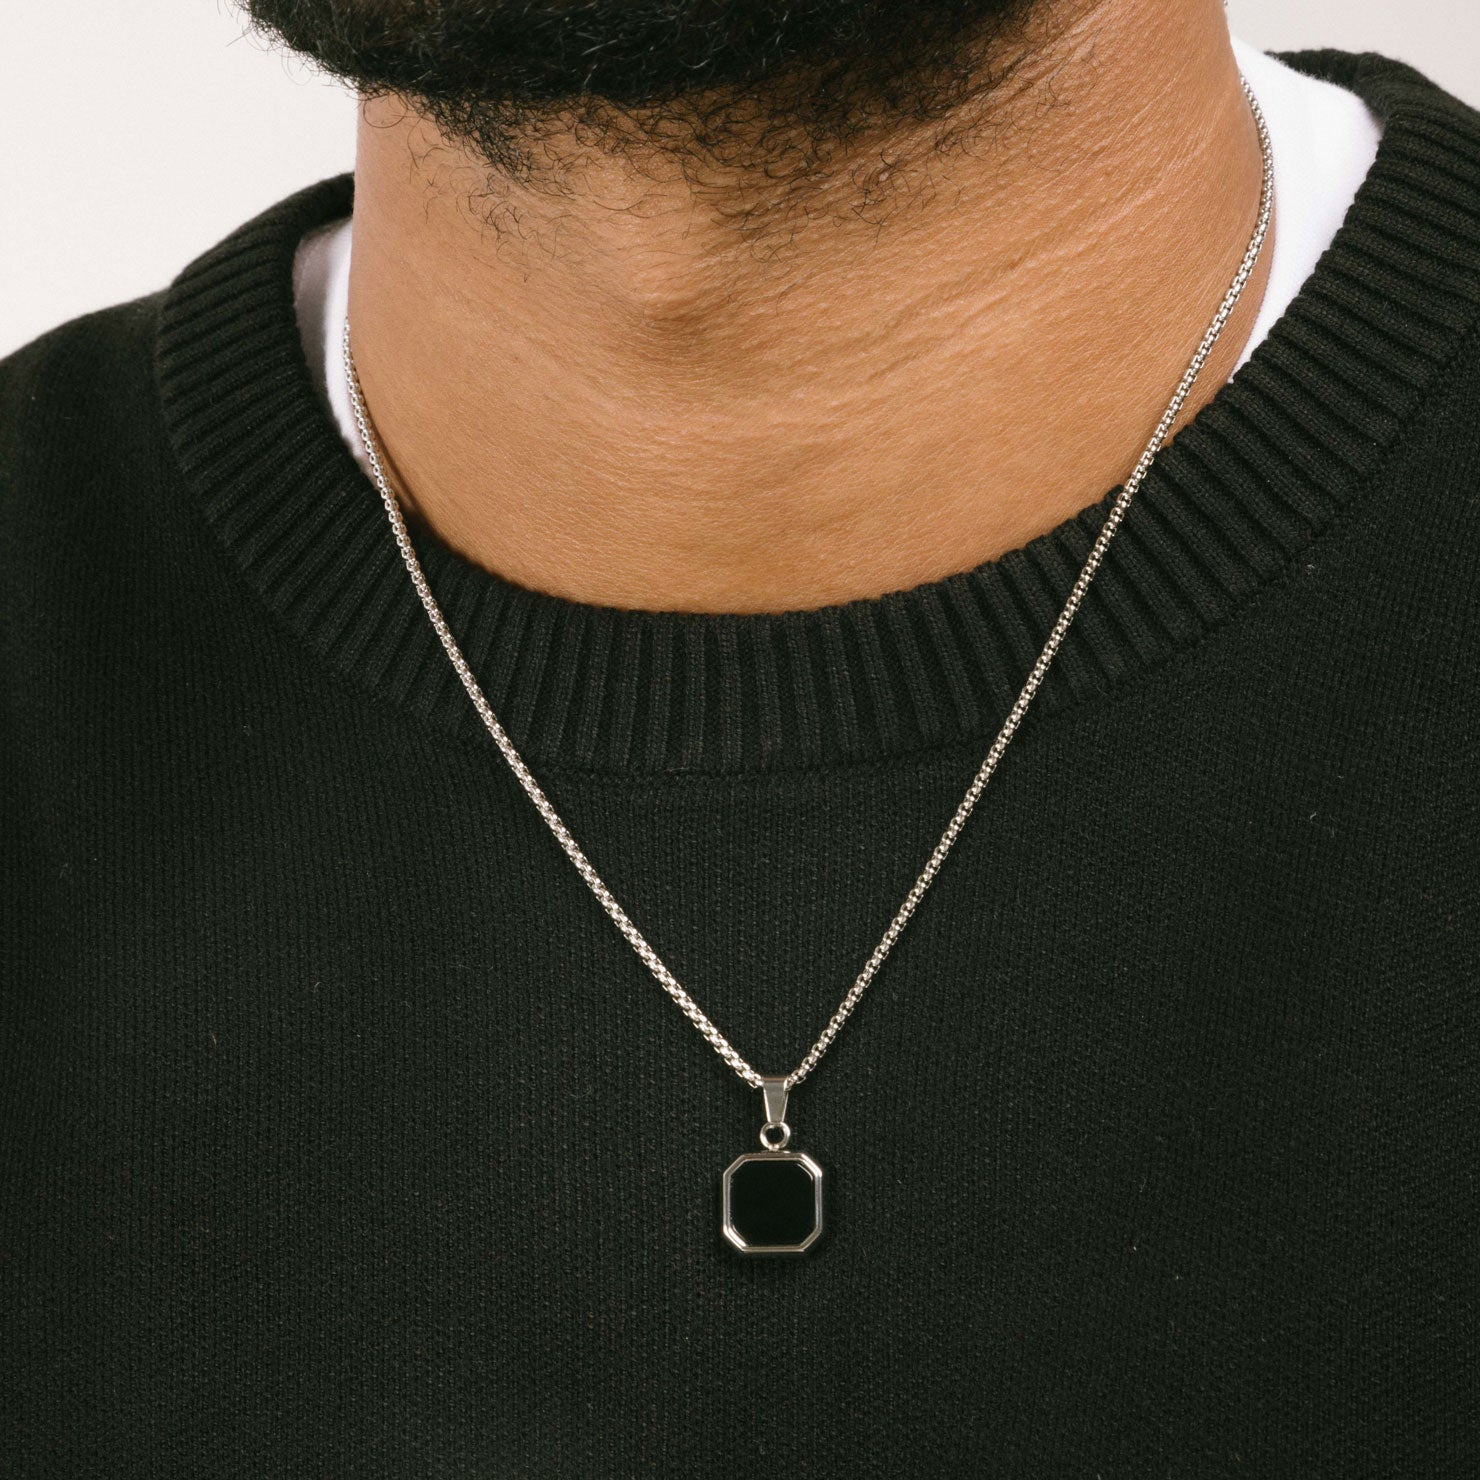 A model wearing the Square Signet Pendant Chain is crafted from durable stainless steel, providing reliable wear and tear resistance. It's also non-tarnish, water resistant, and free of lead, nickel, and cadmium.